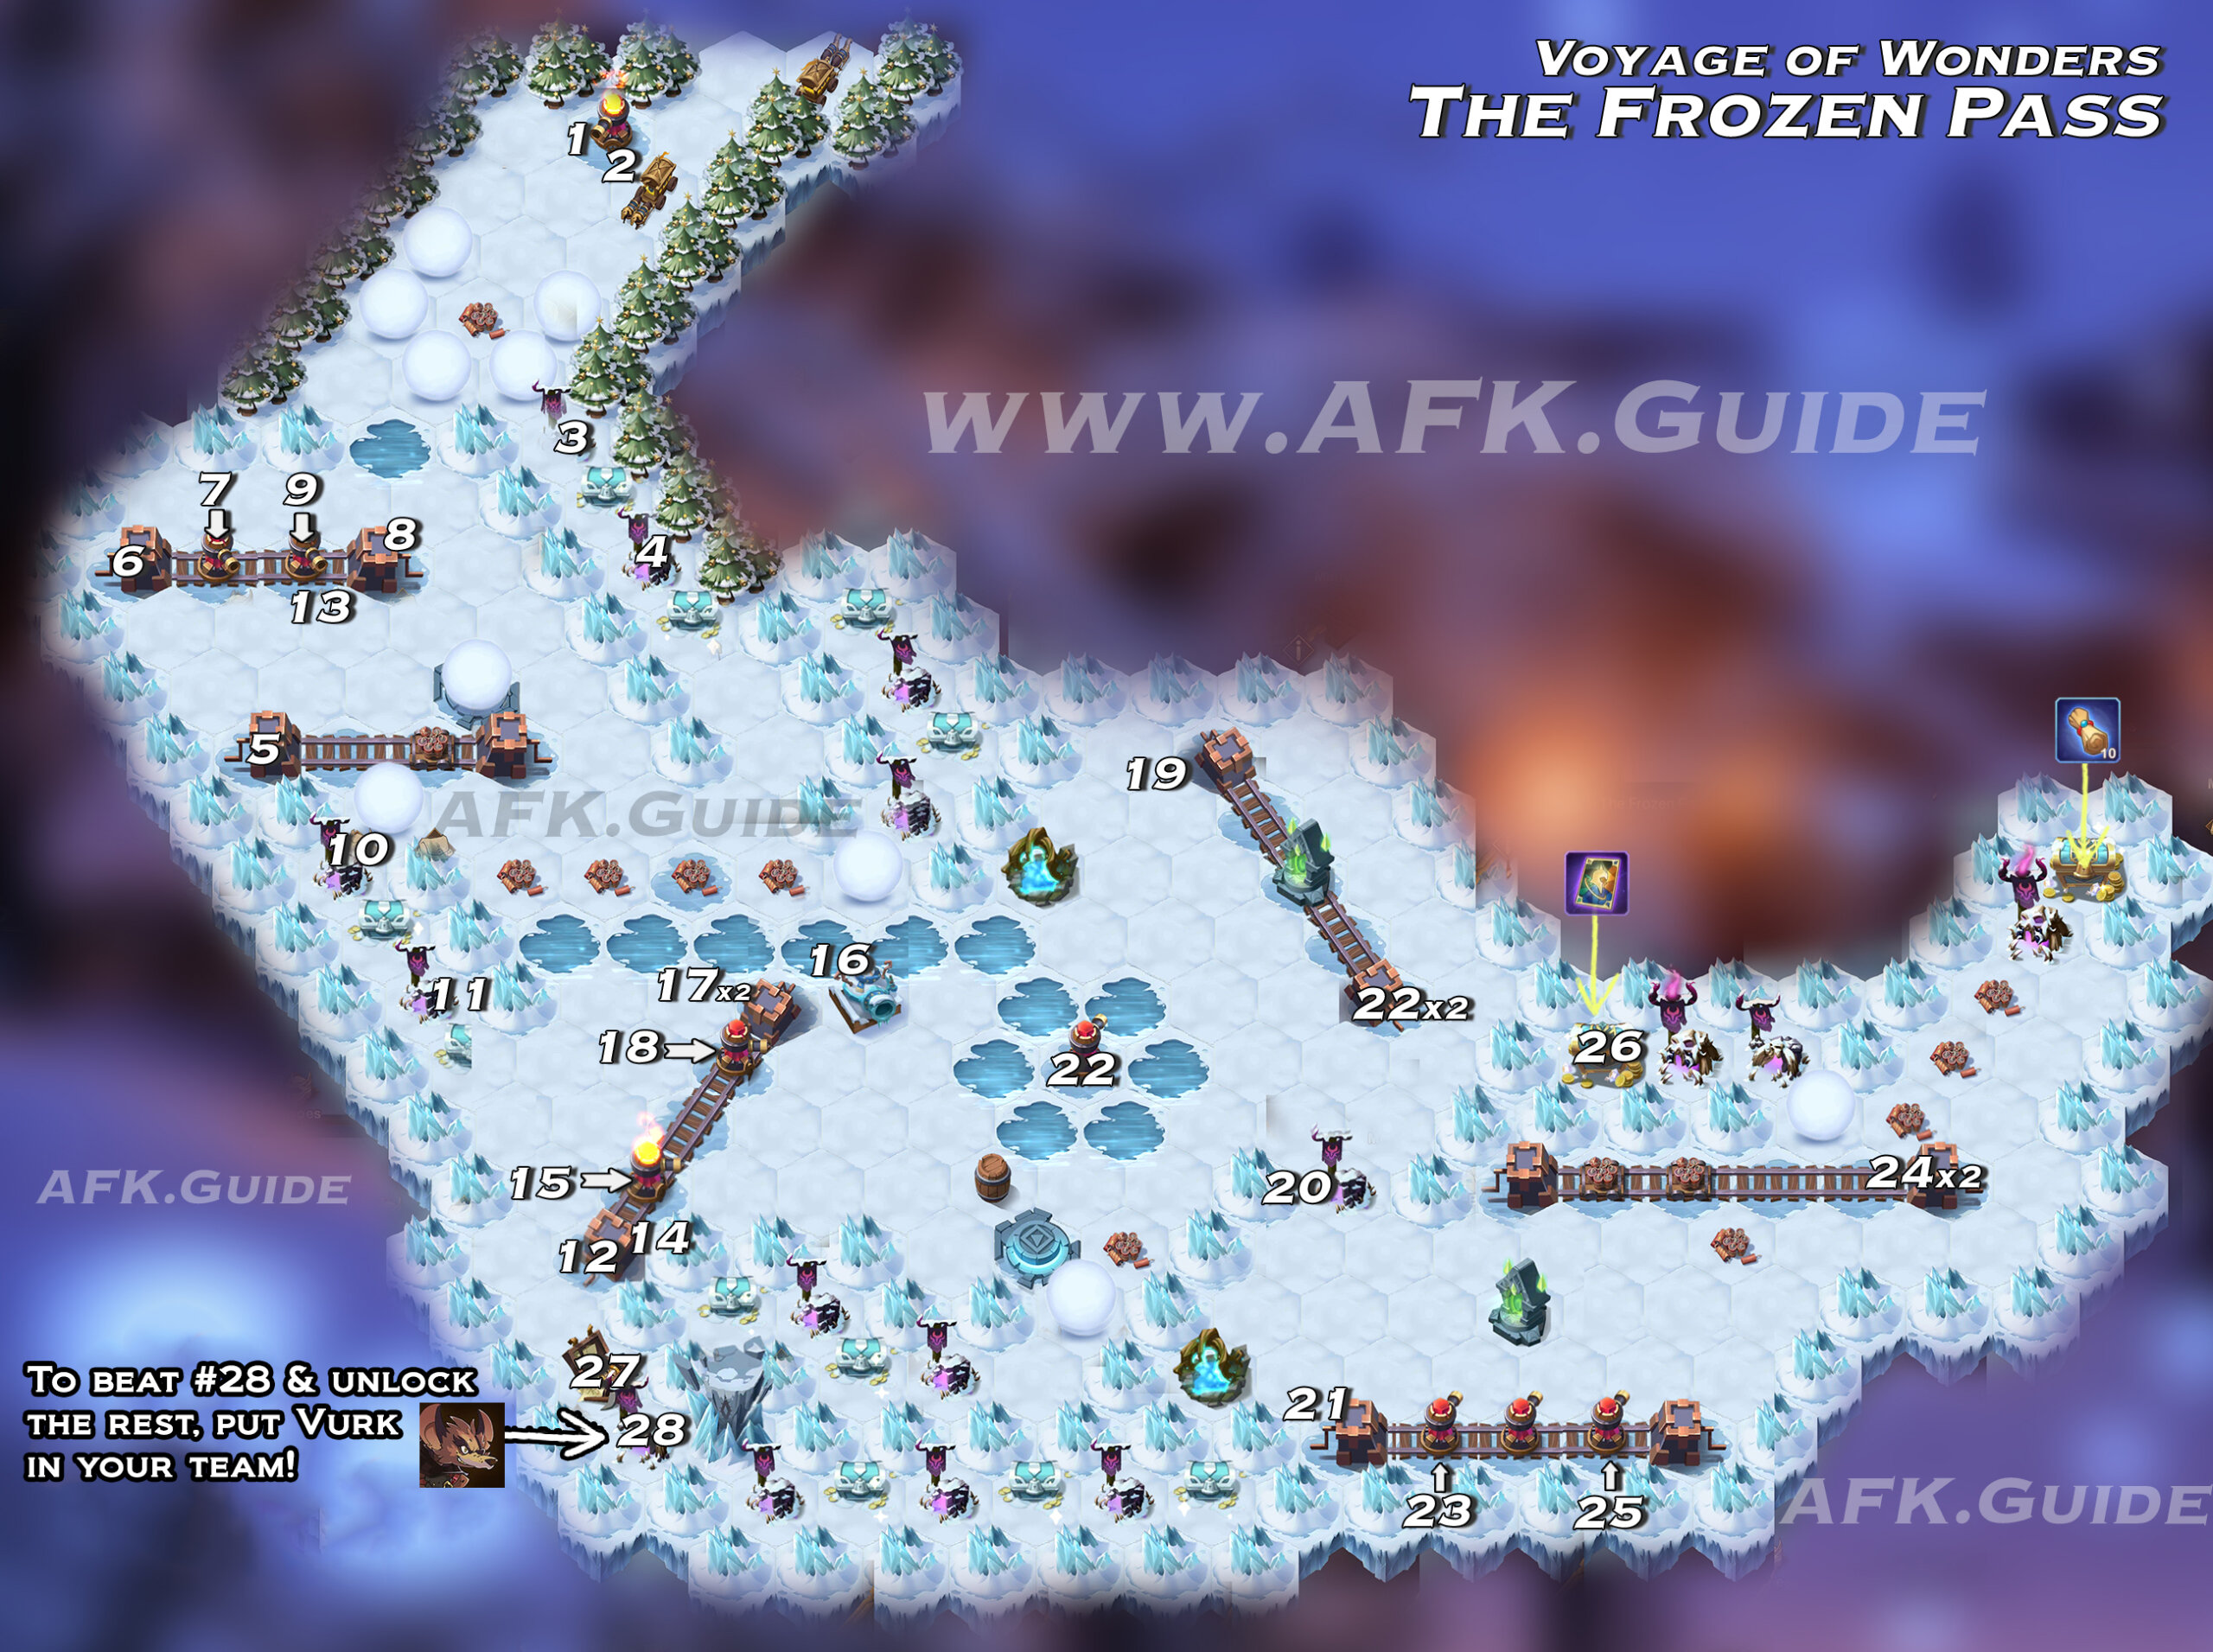 Voyage of Wonders Guide & Map: The Frozen Pass